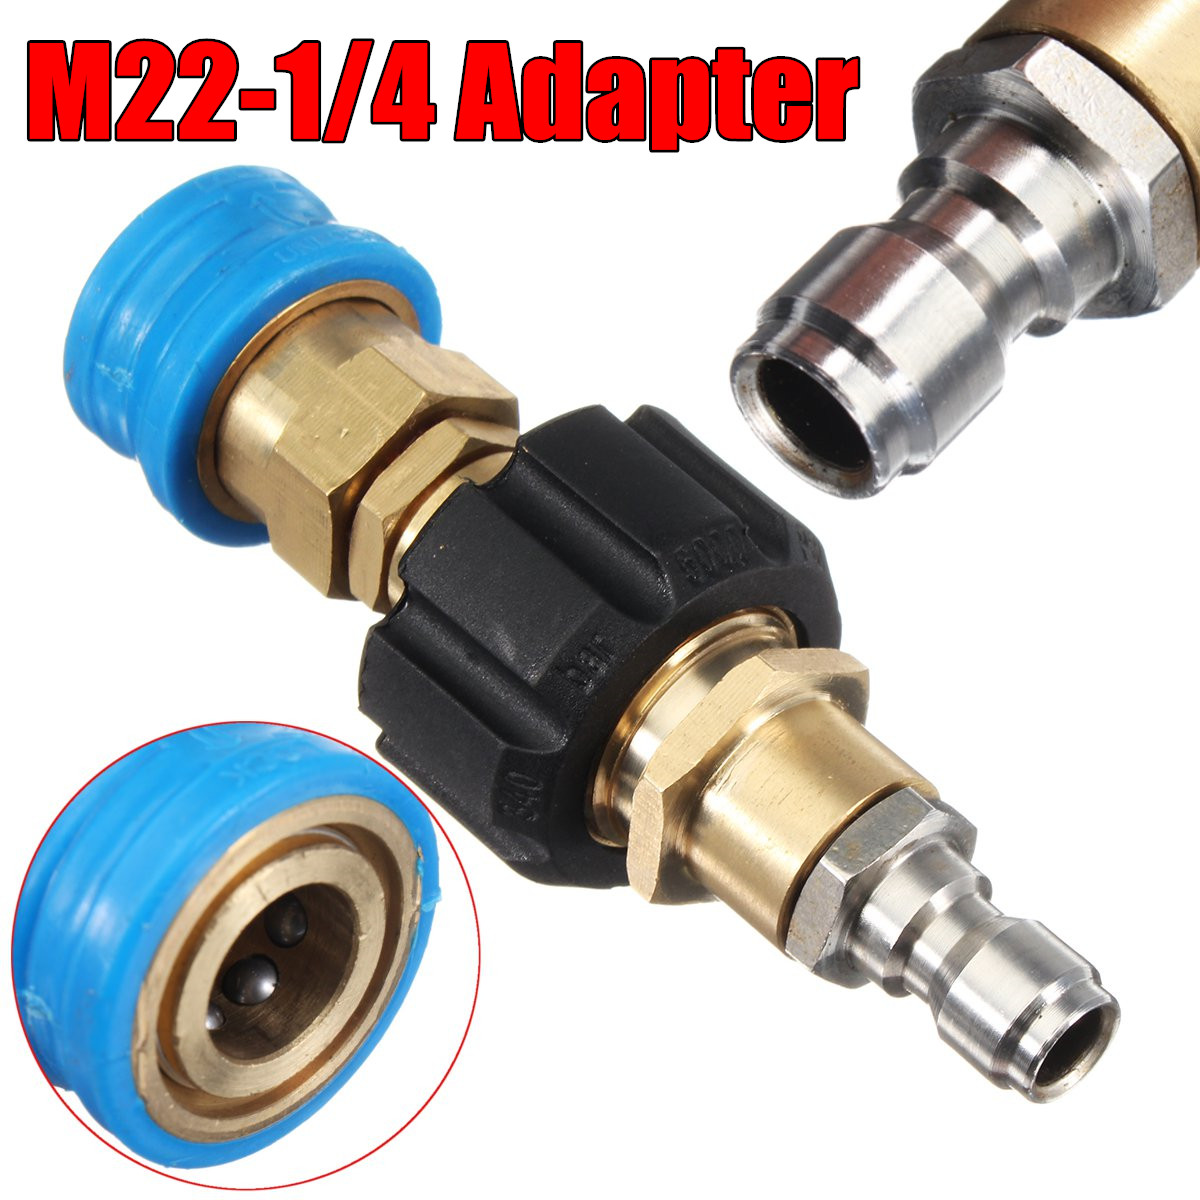 Pressure-Washer-Quick-Release-Joiner-Adapter-To-M22-Karcher-amp-Nilfisk-Compatible-1278701